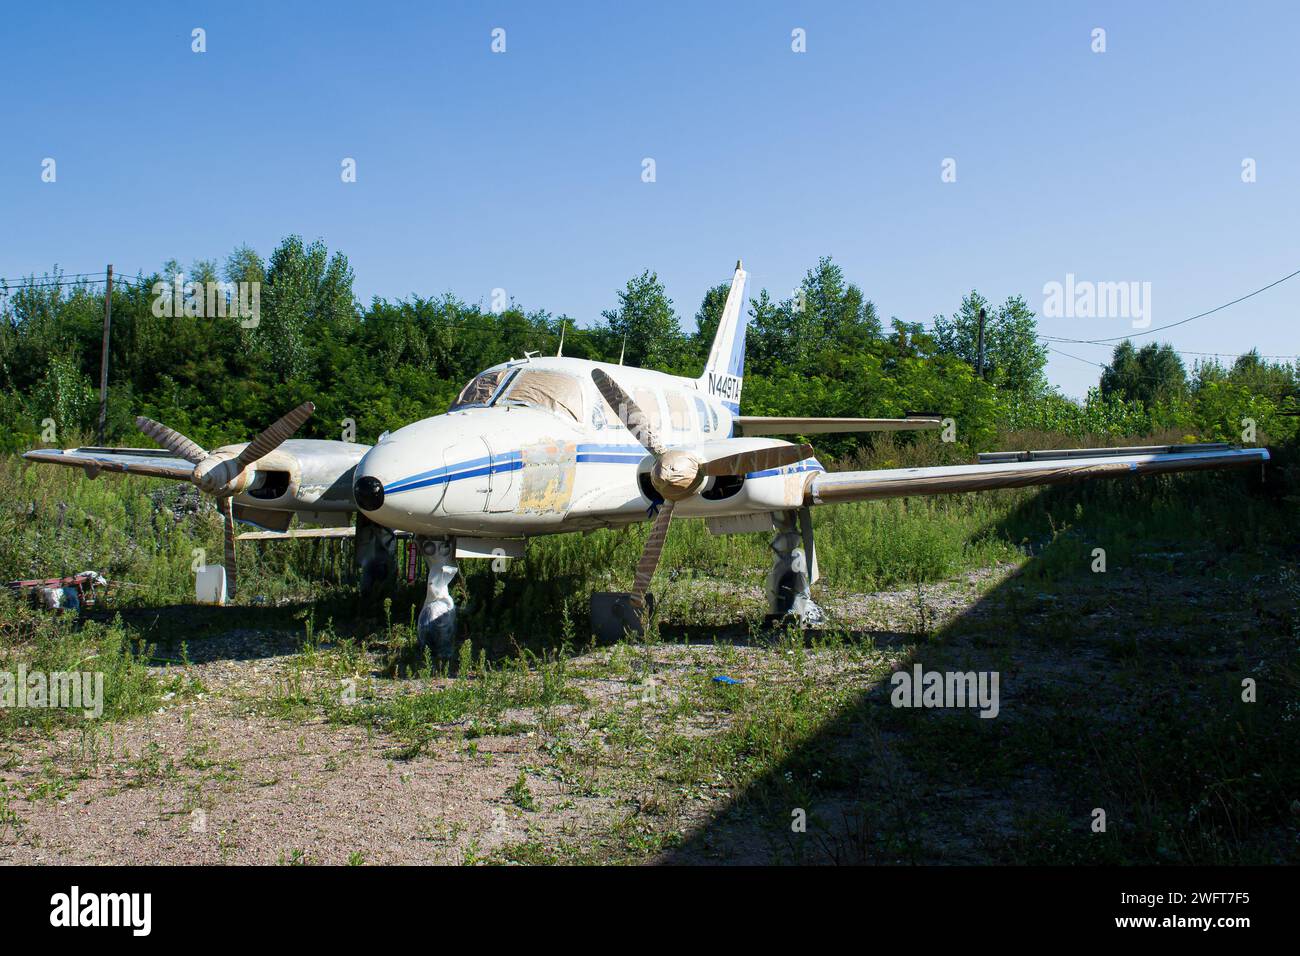 White small abandoned unbranded private passenger turboprop aircraft parked Stock Photo